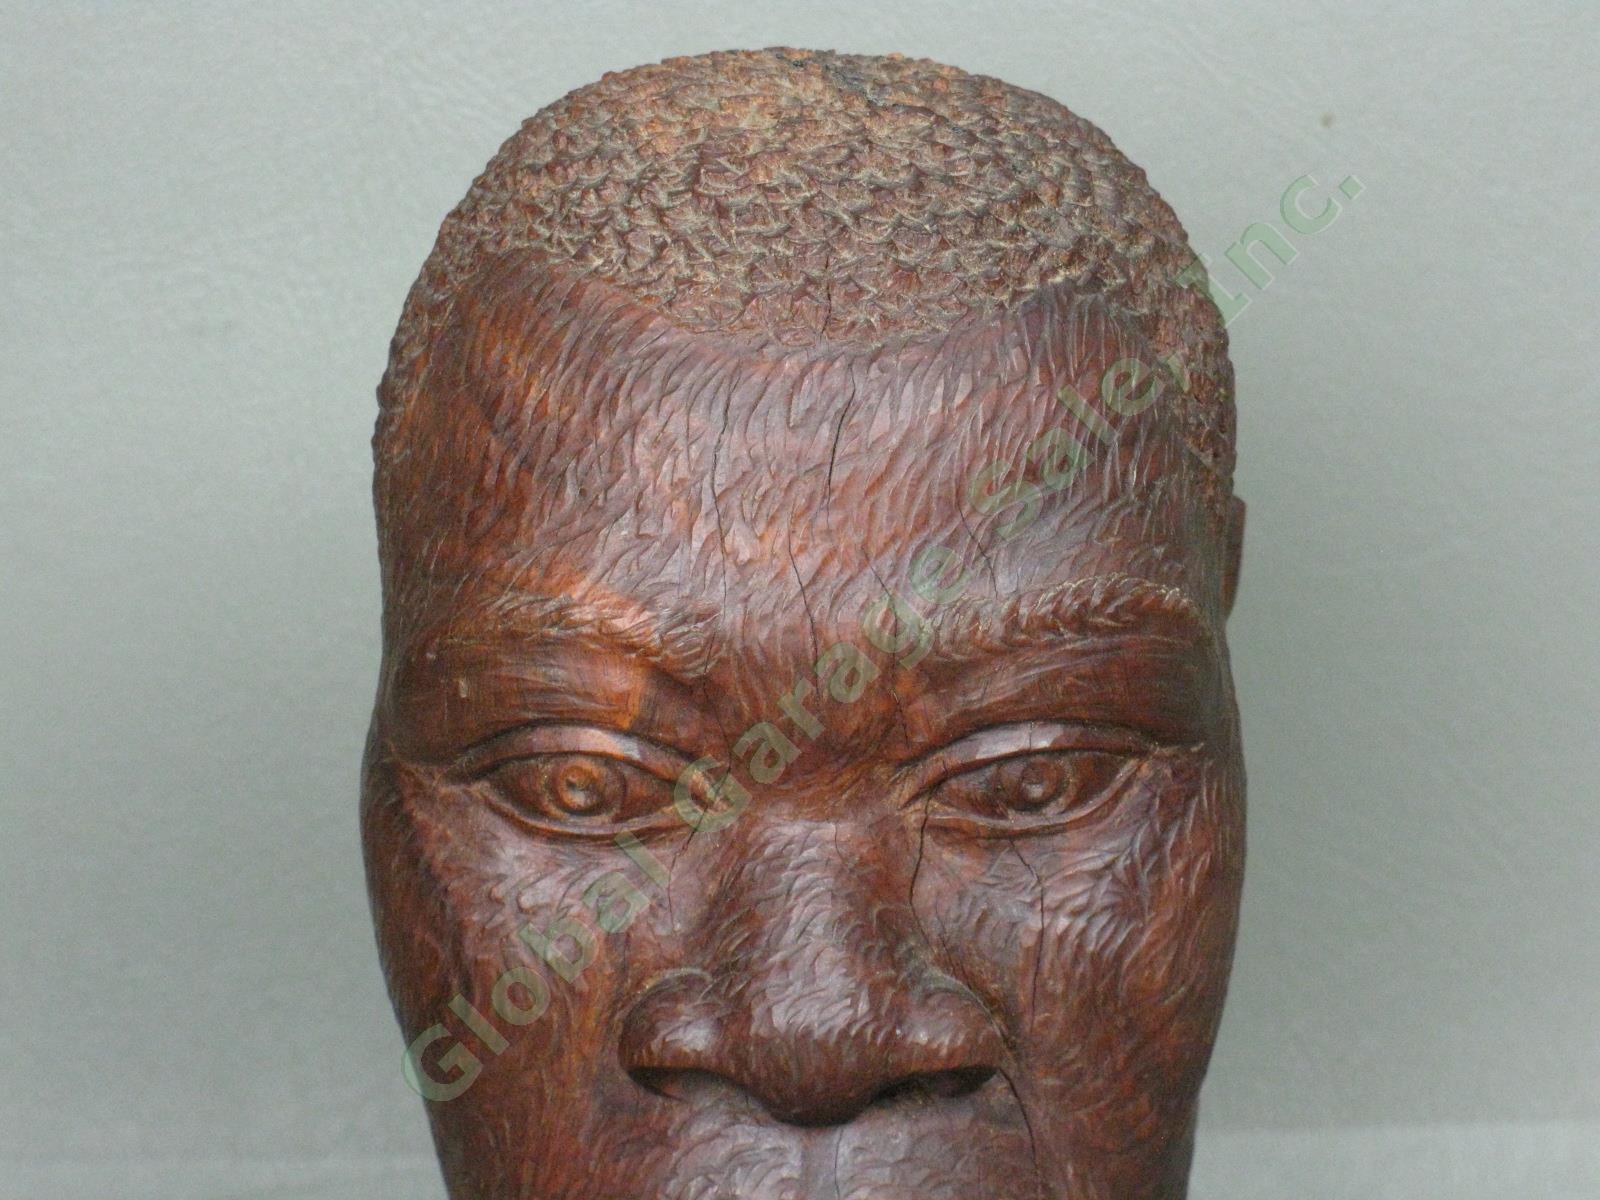 Vtg 1940s Jamaican Jamaica BWI 7" Male Head Bust Wood Carving Signed Lazarus NR! 1